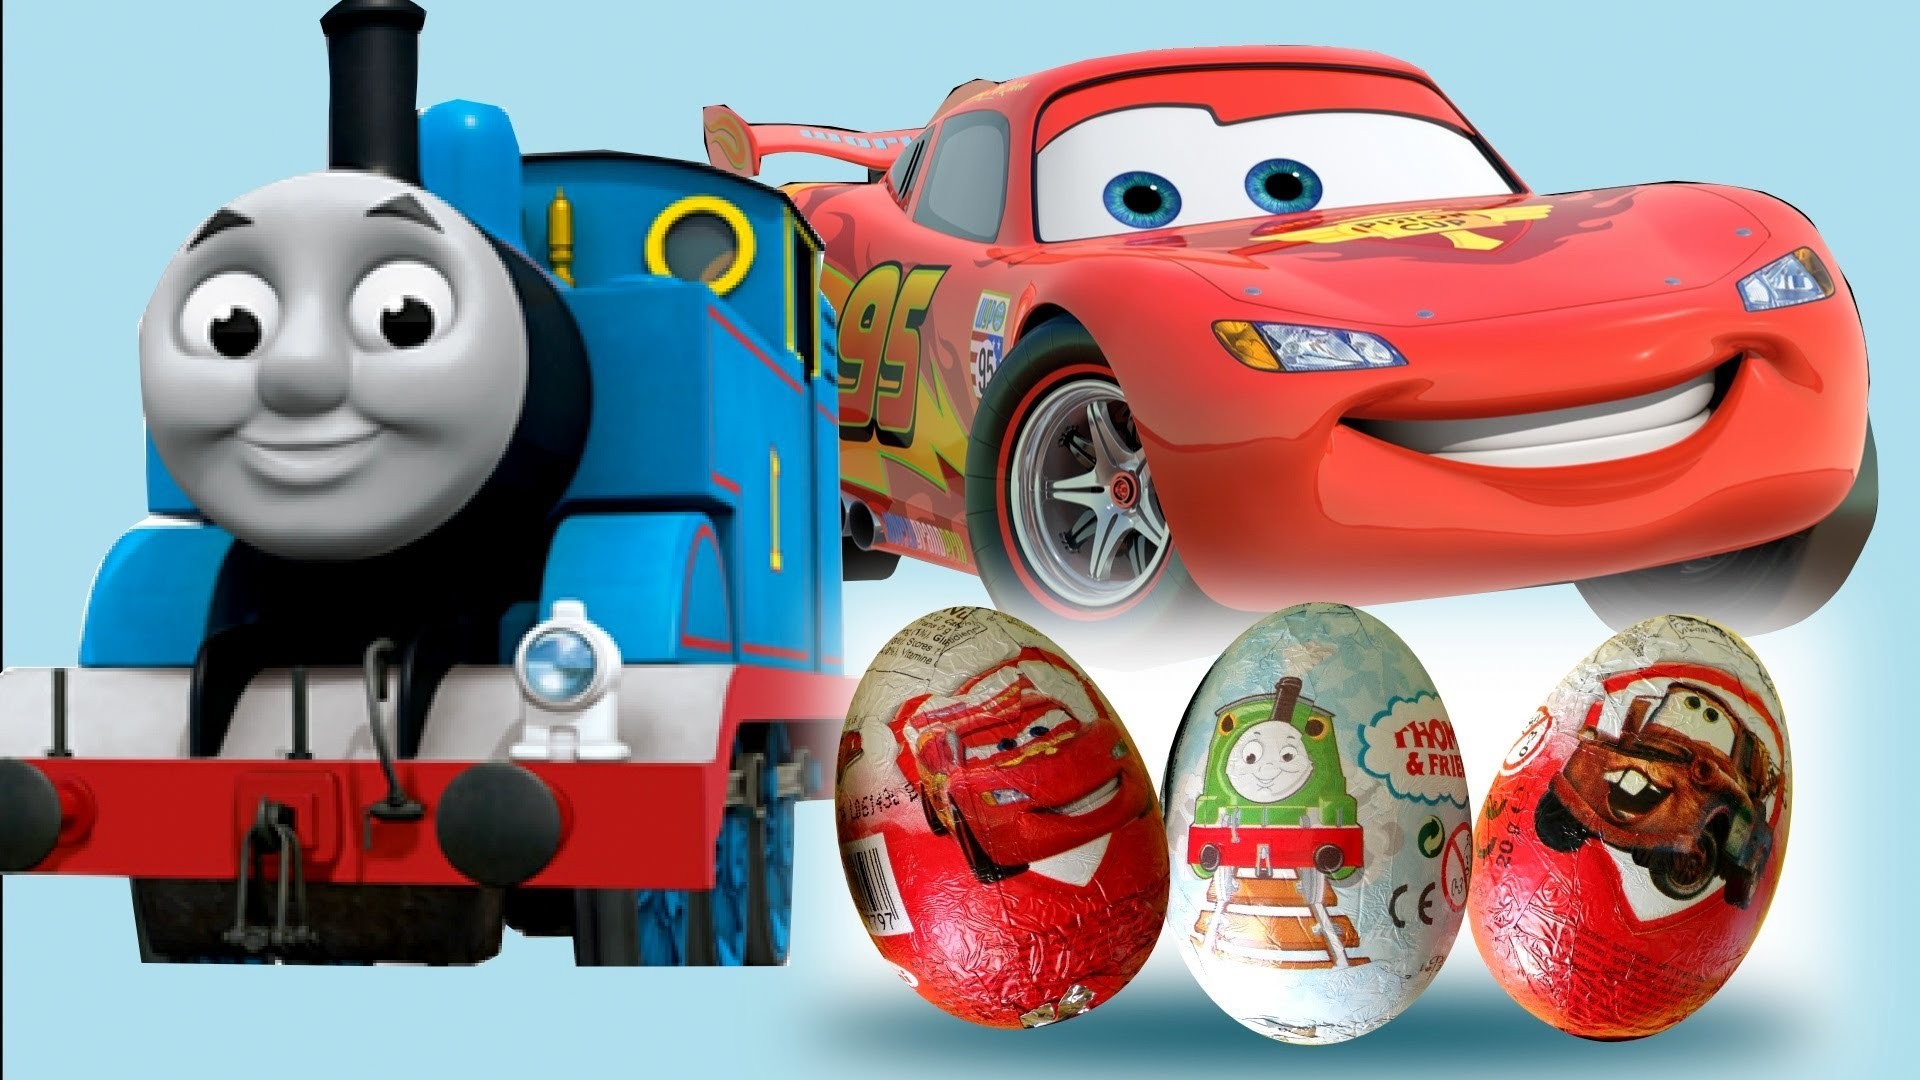 1920x1080 2013* Unwrapping 3 Surprise Eggs Cars 2 and Thomas the train and